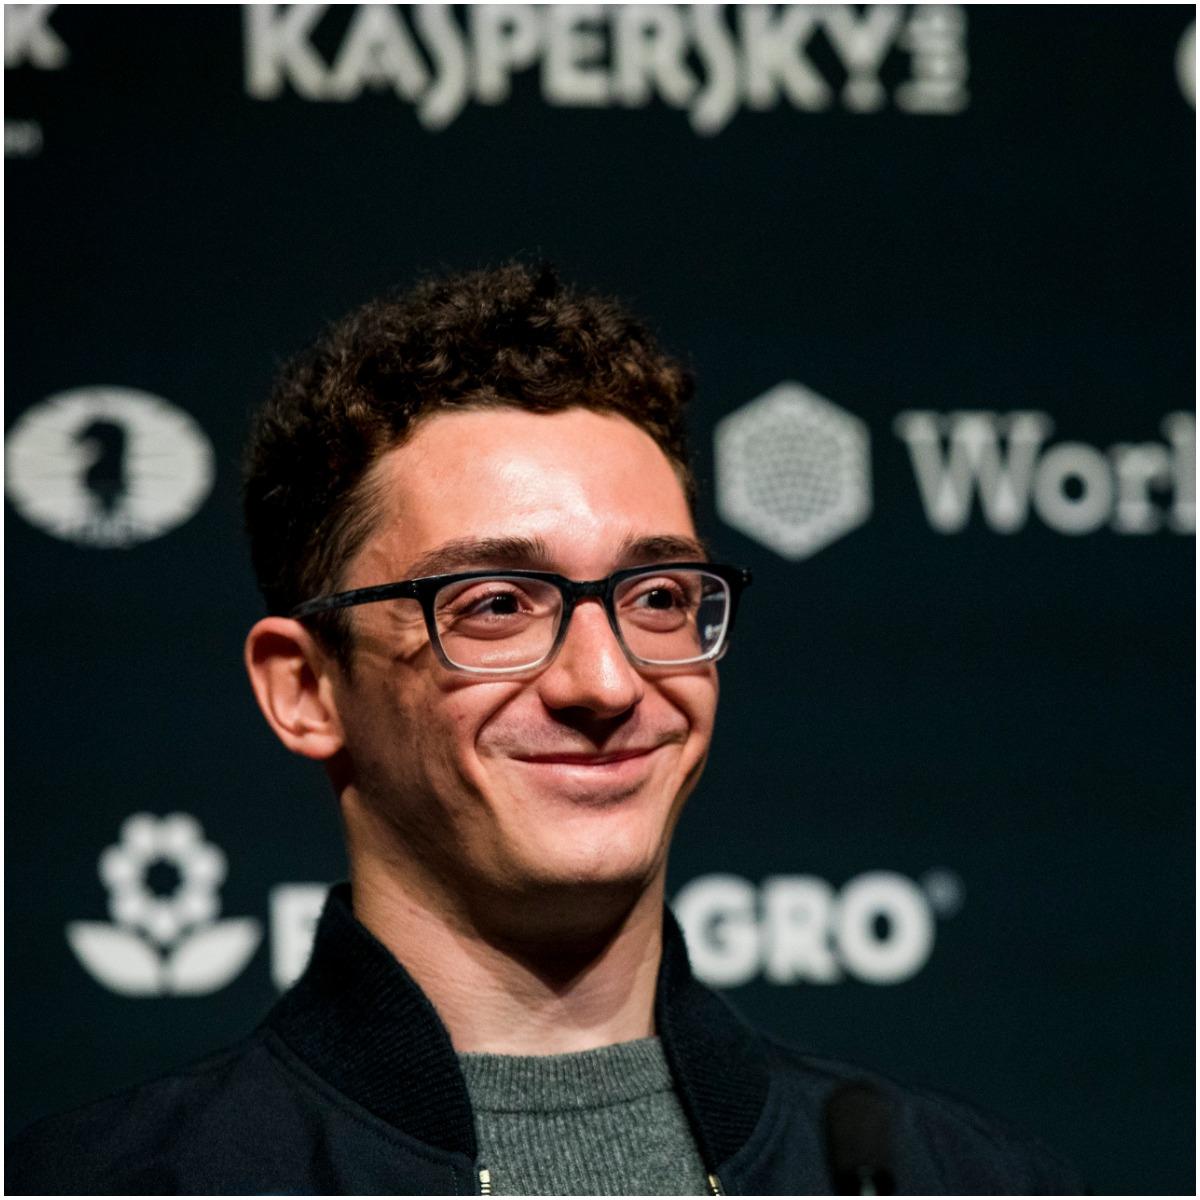 what is the net worth of Fabiano Caruana